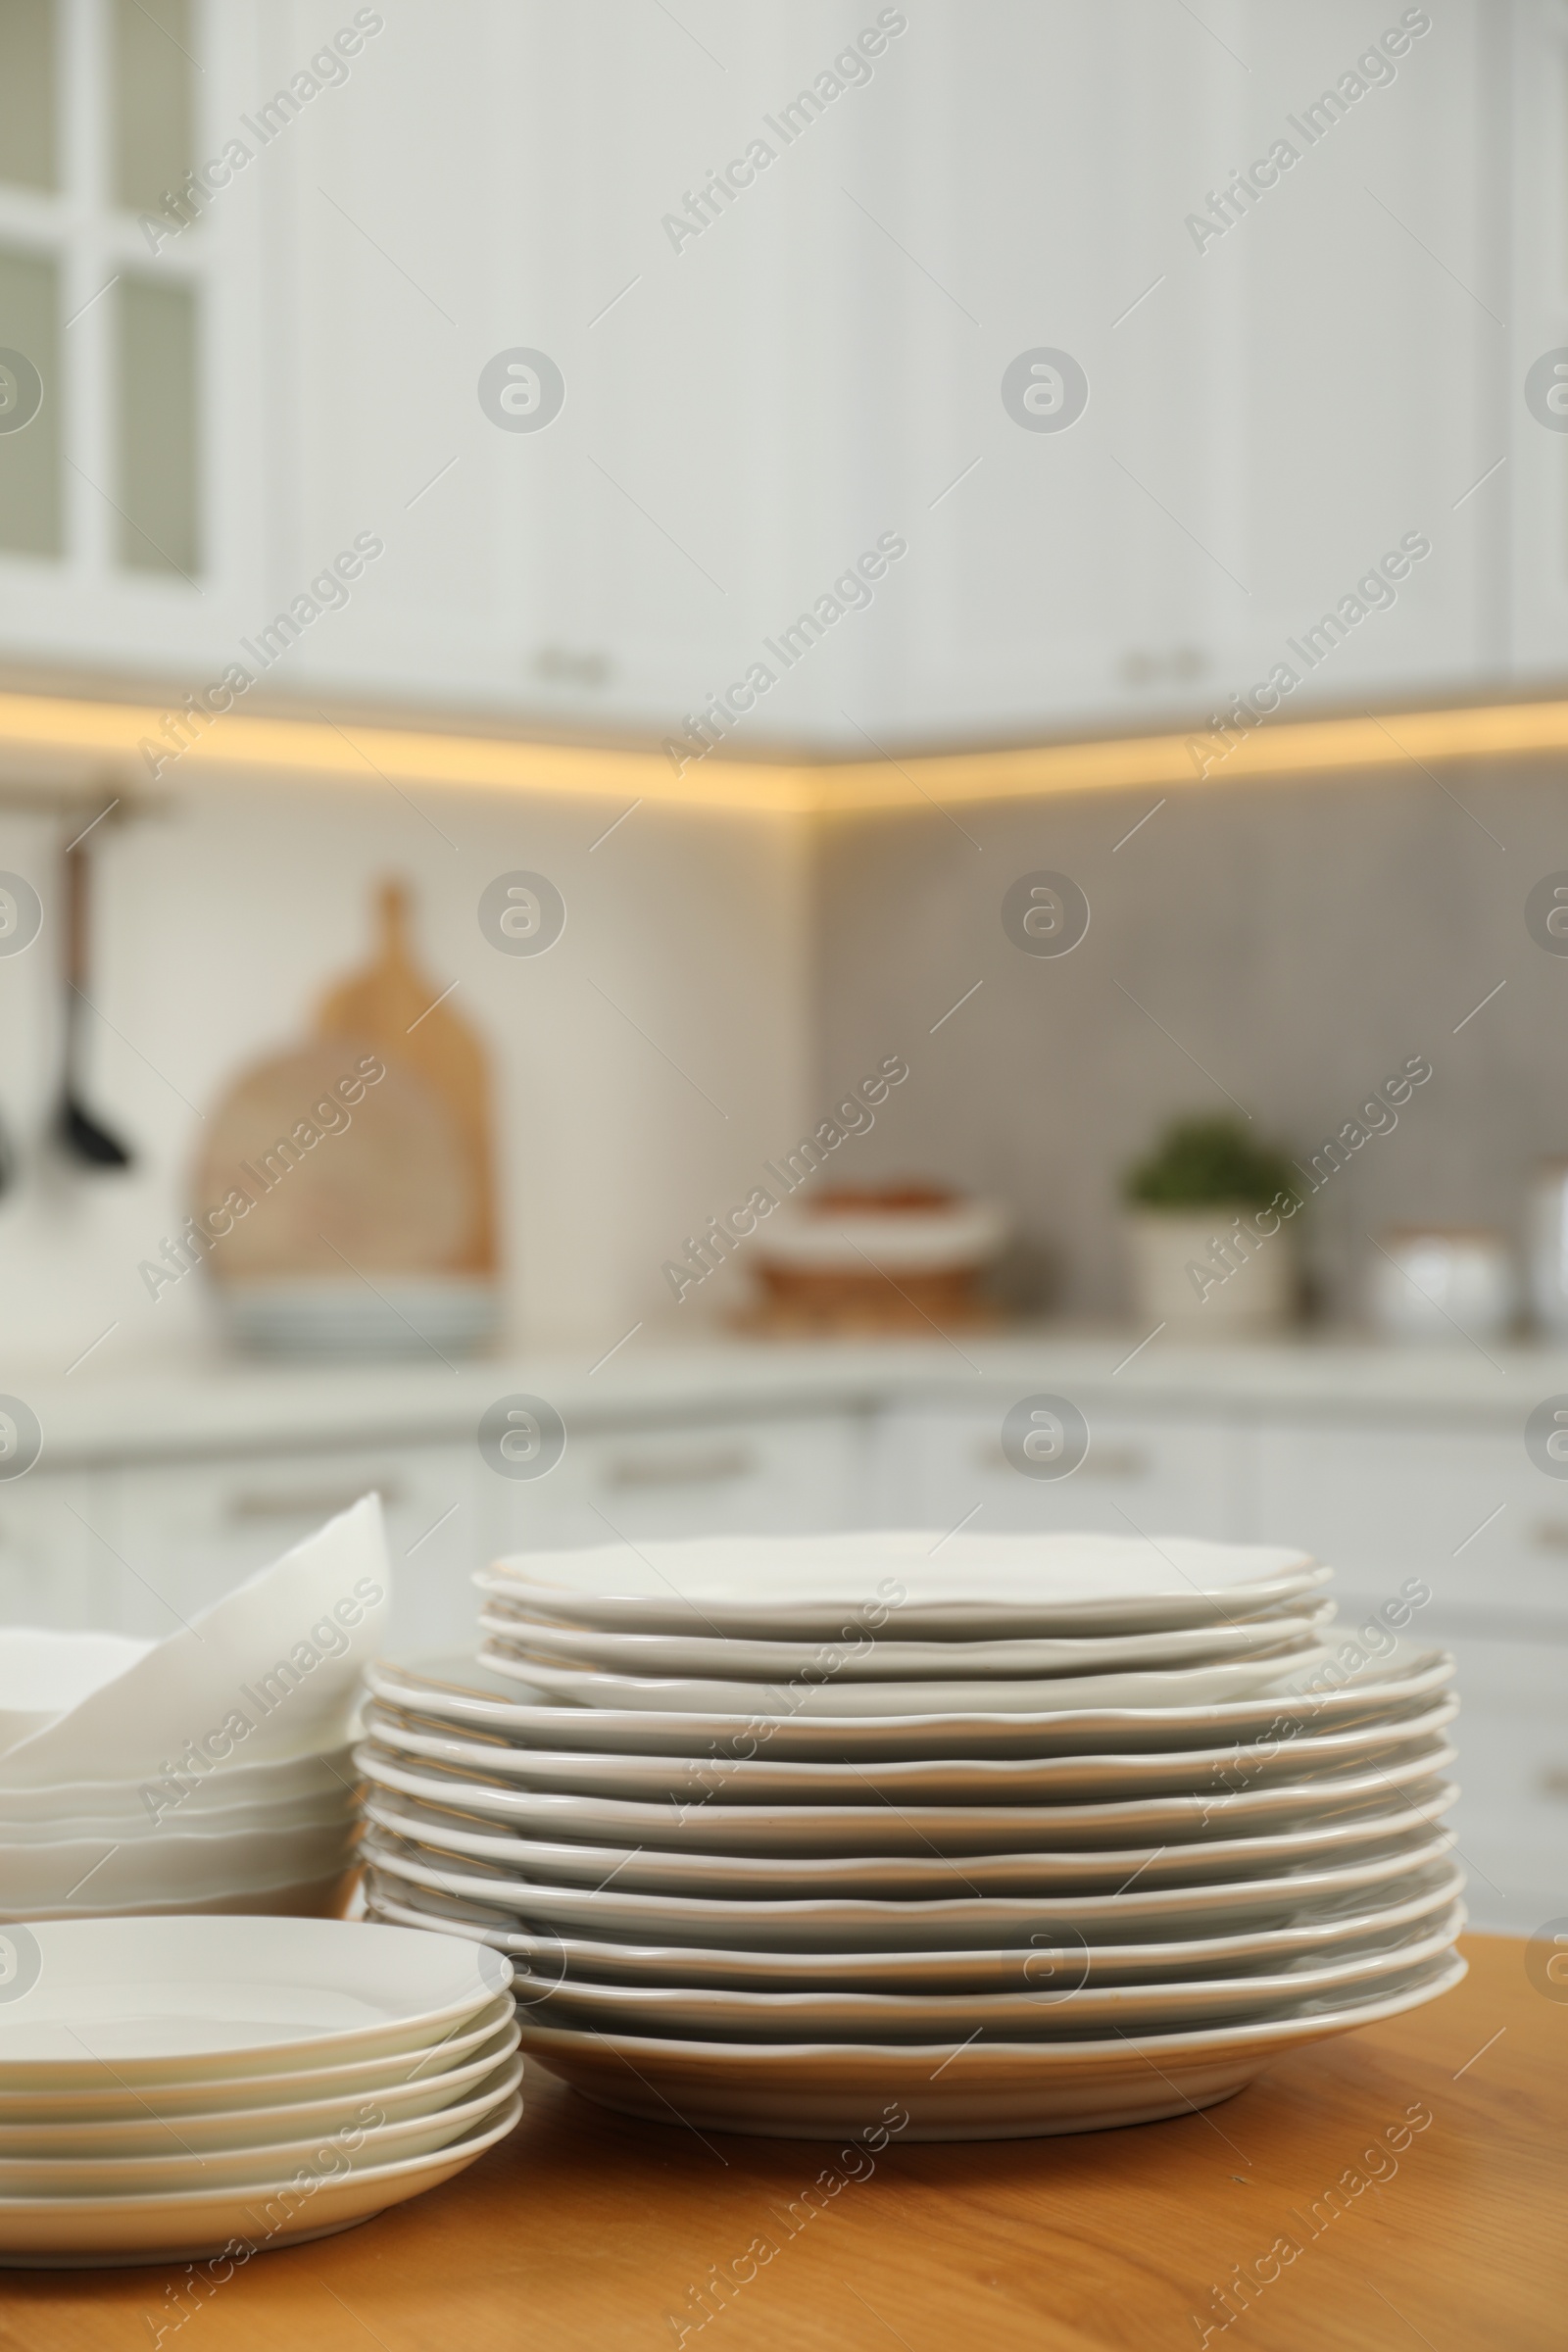 Photo of Clean plates and bowls on wooden table in kitchen